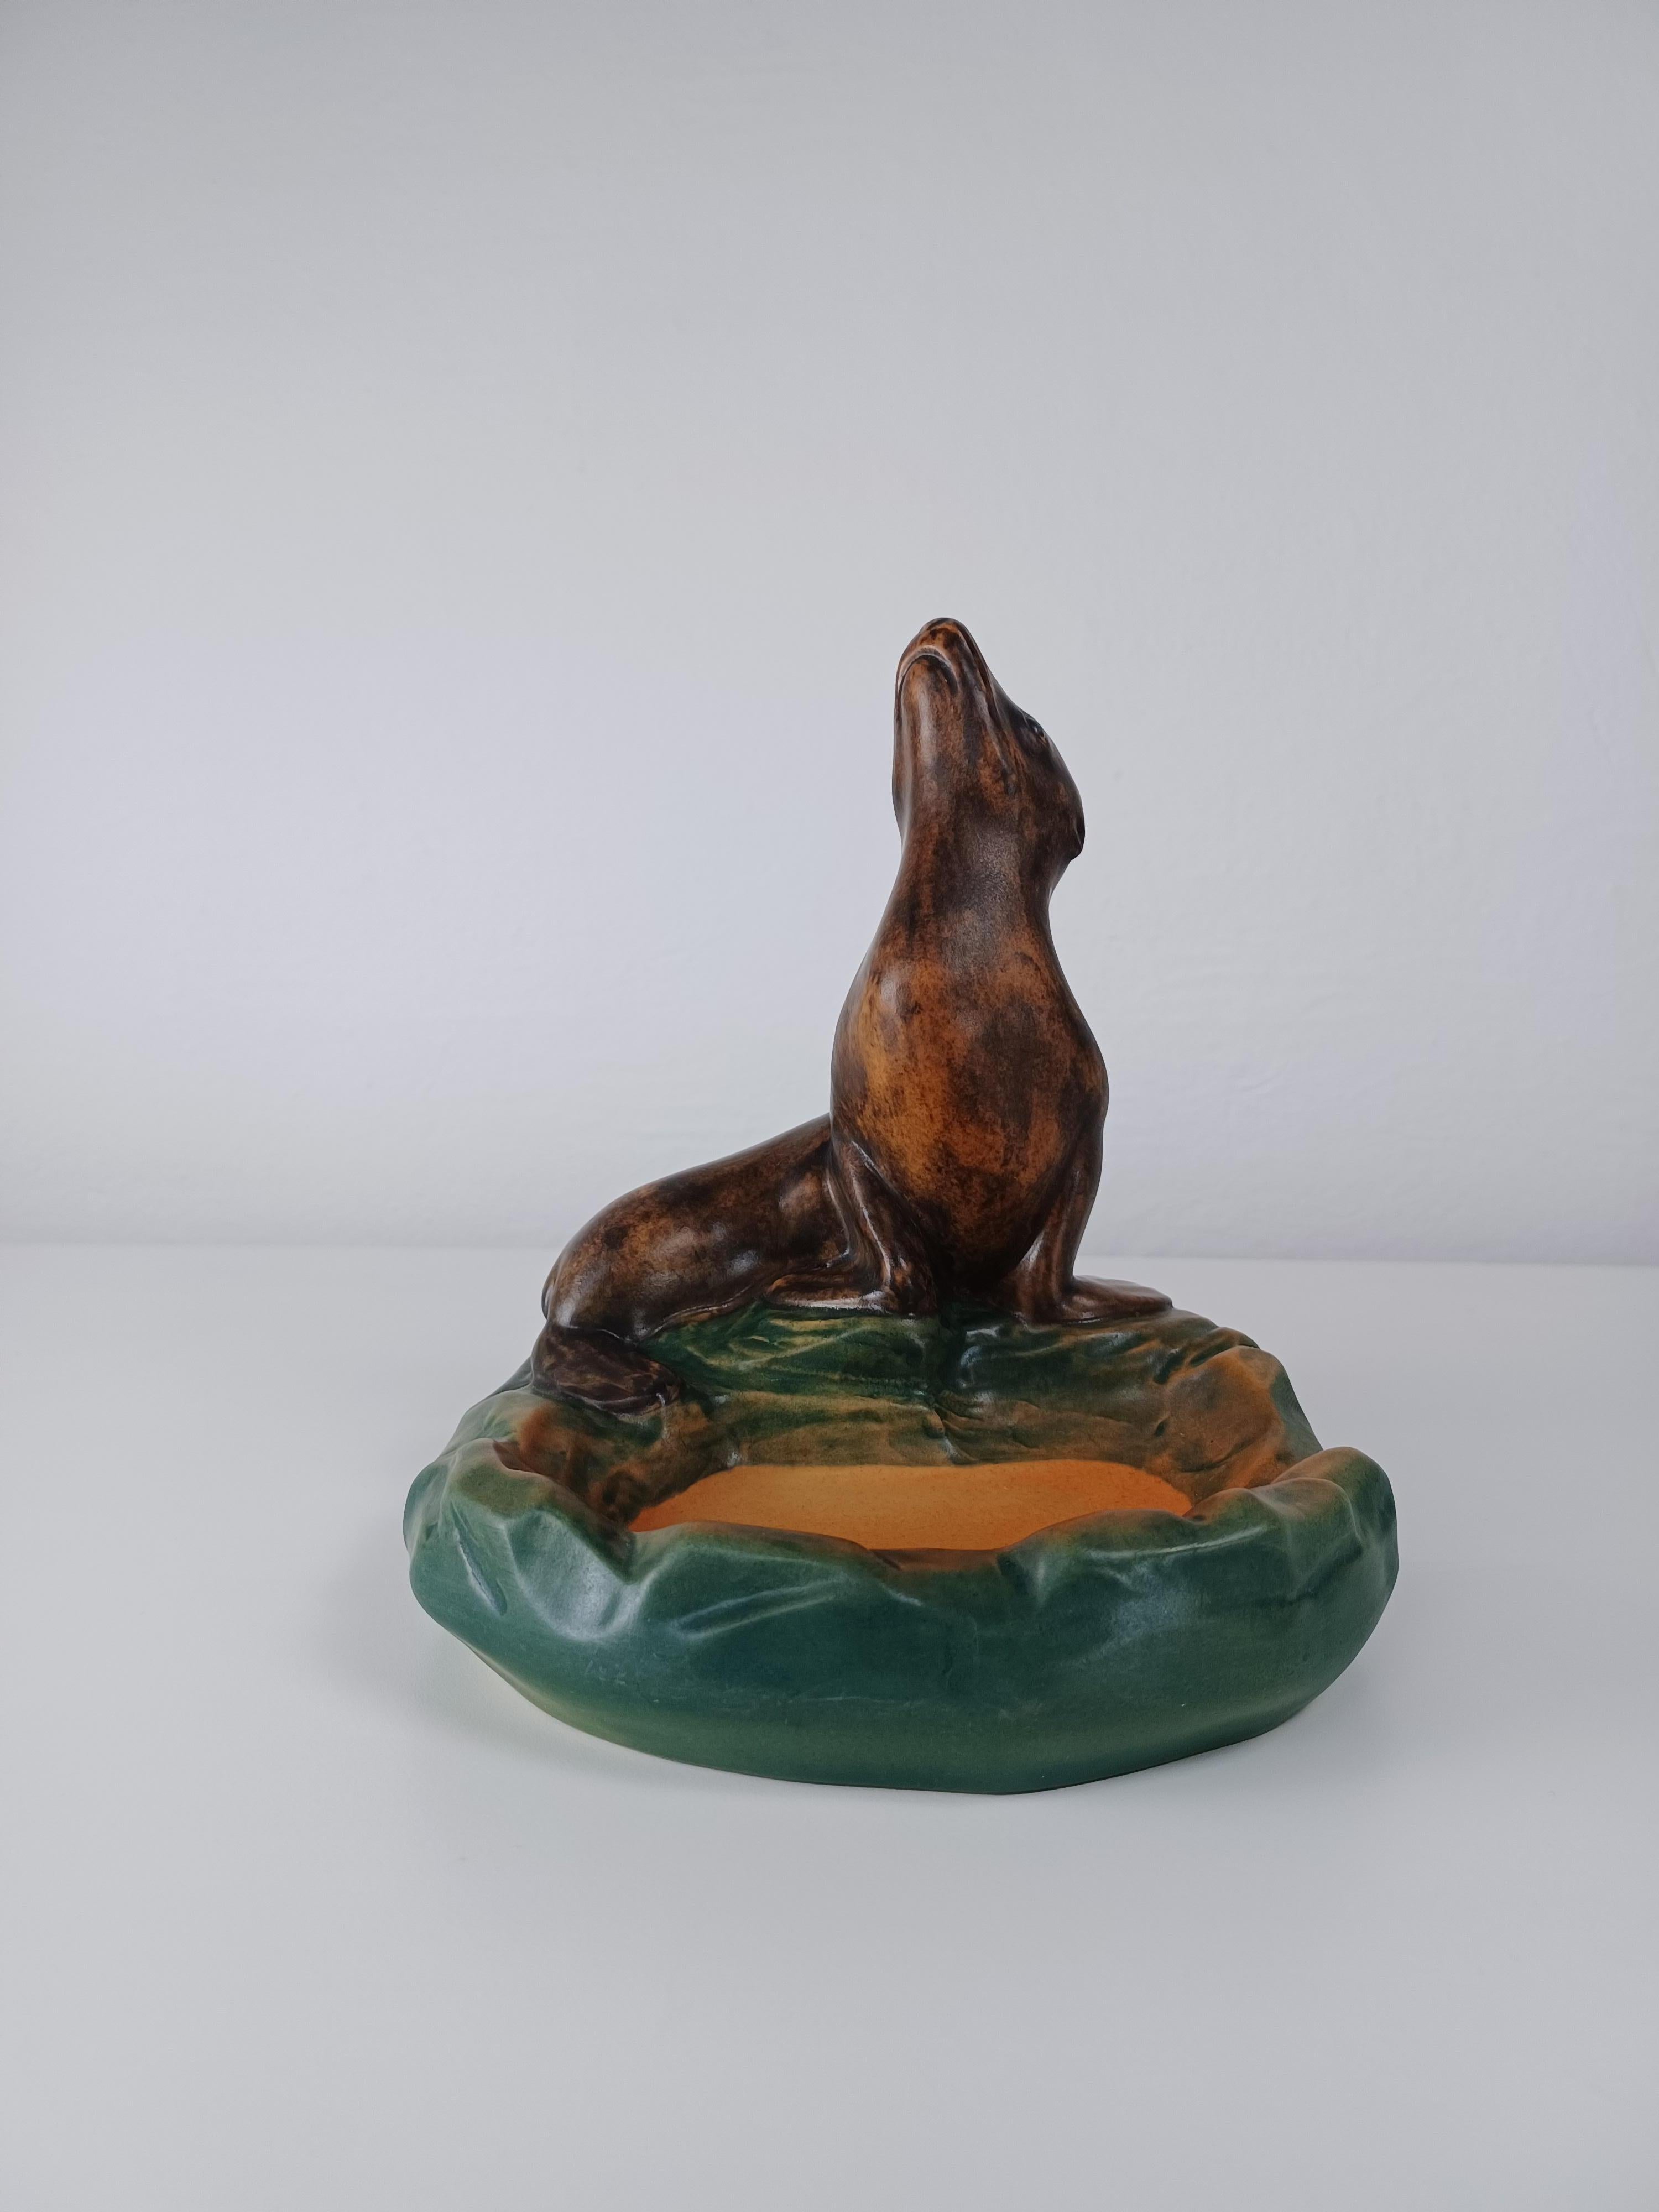 Danish hand-crafted Art Nouveau seal ash tray / bowl designed by Axel Sørensen in 1929 for P. Ipsens Enke.

The Art Nuveau ash tray / bowl feature a lively seal and is in excellent condition.

Ipsens Enke (1843 - 1955) was a very successful